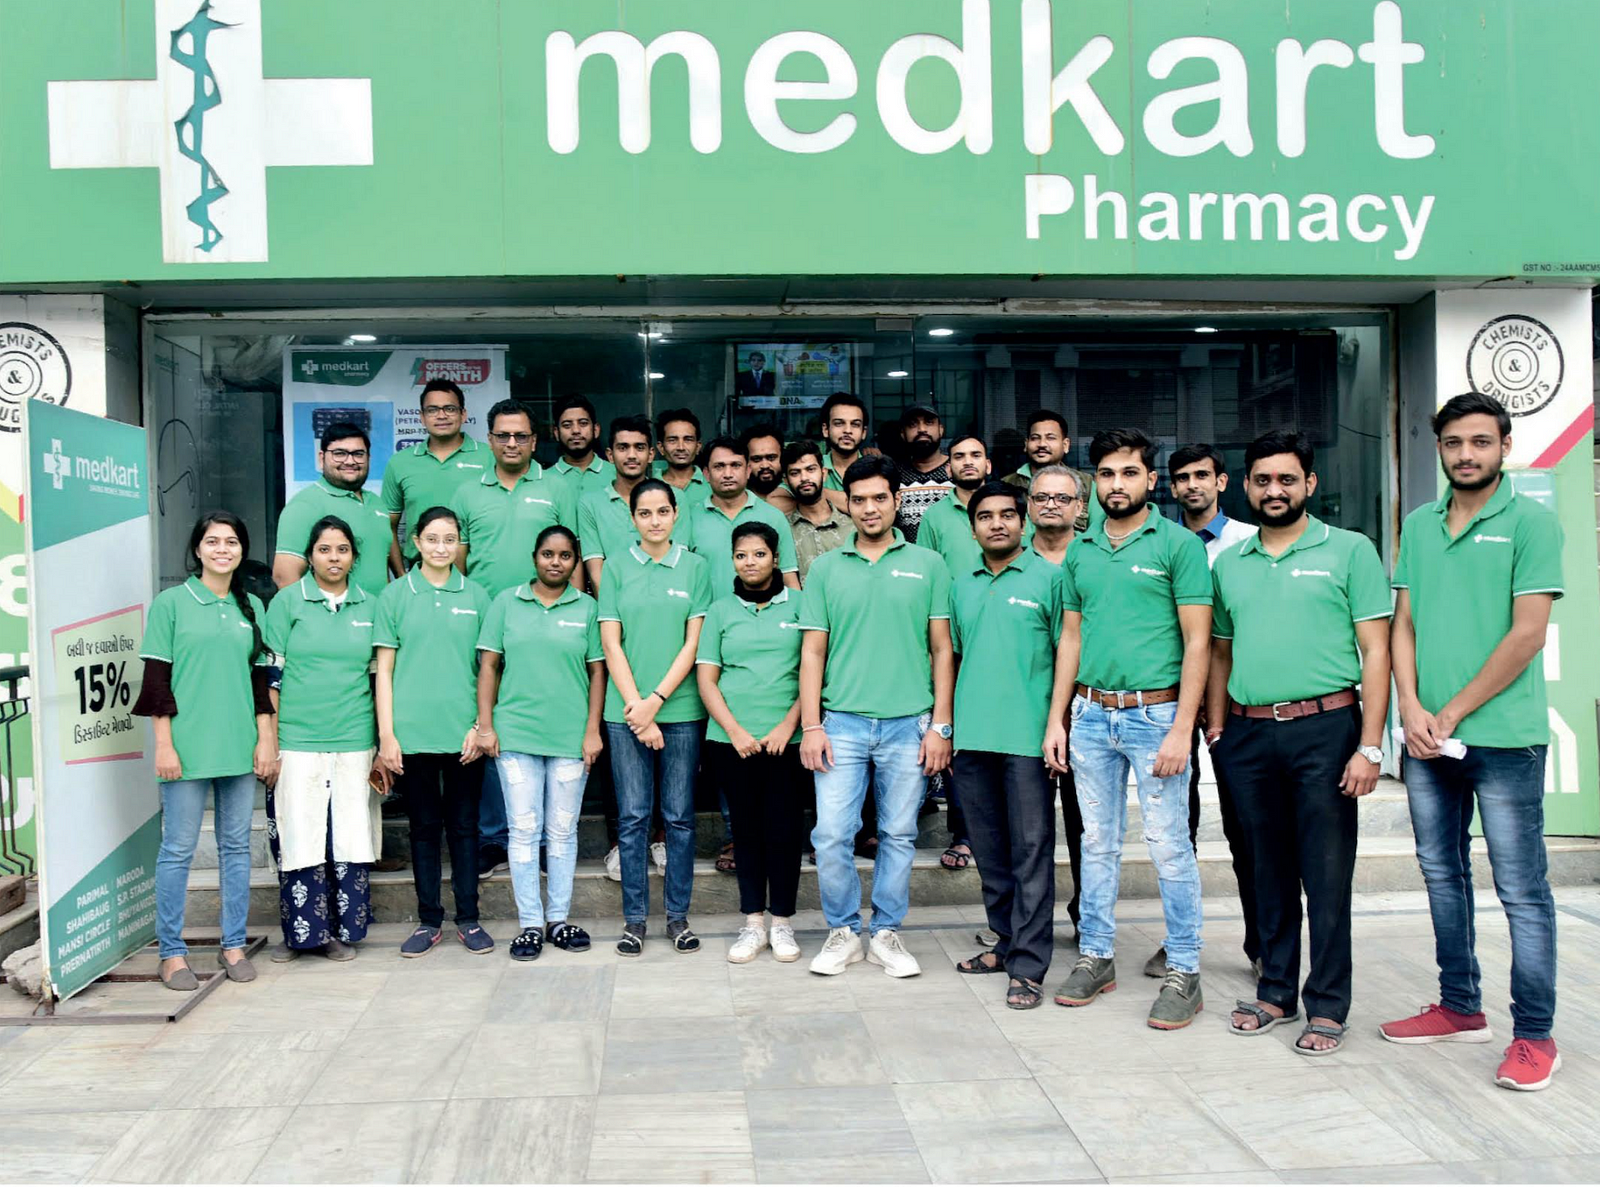 Generic medicines and the part they play - an interview with Medkart Pharmacy founder Ankur Agarwal